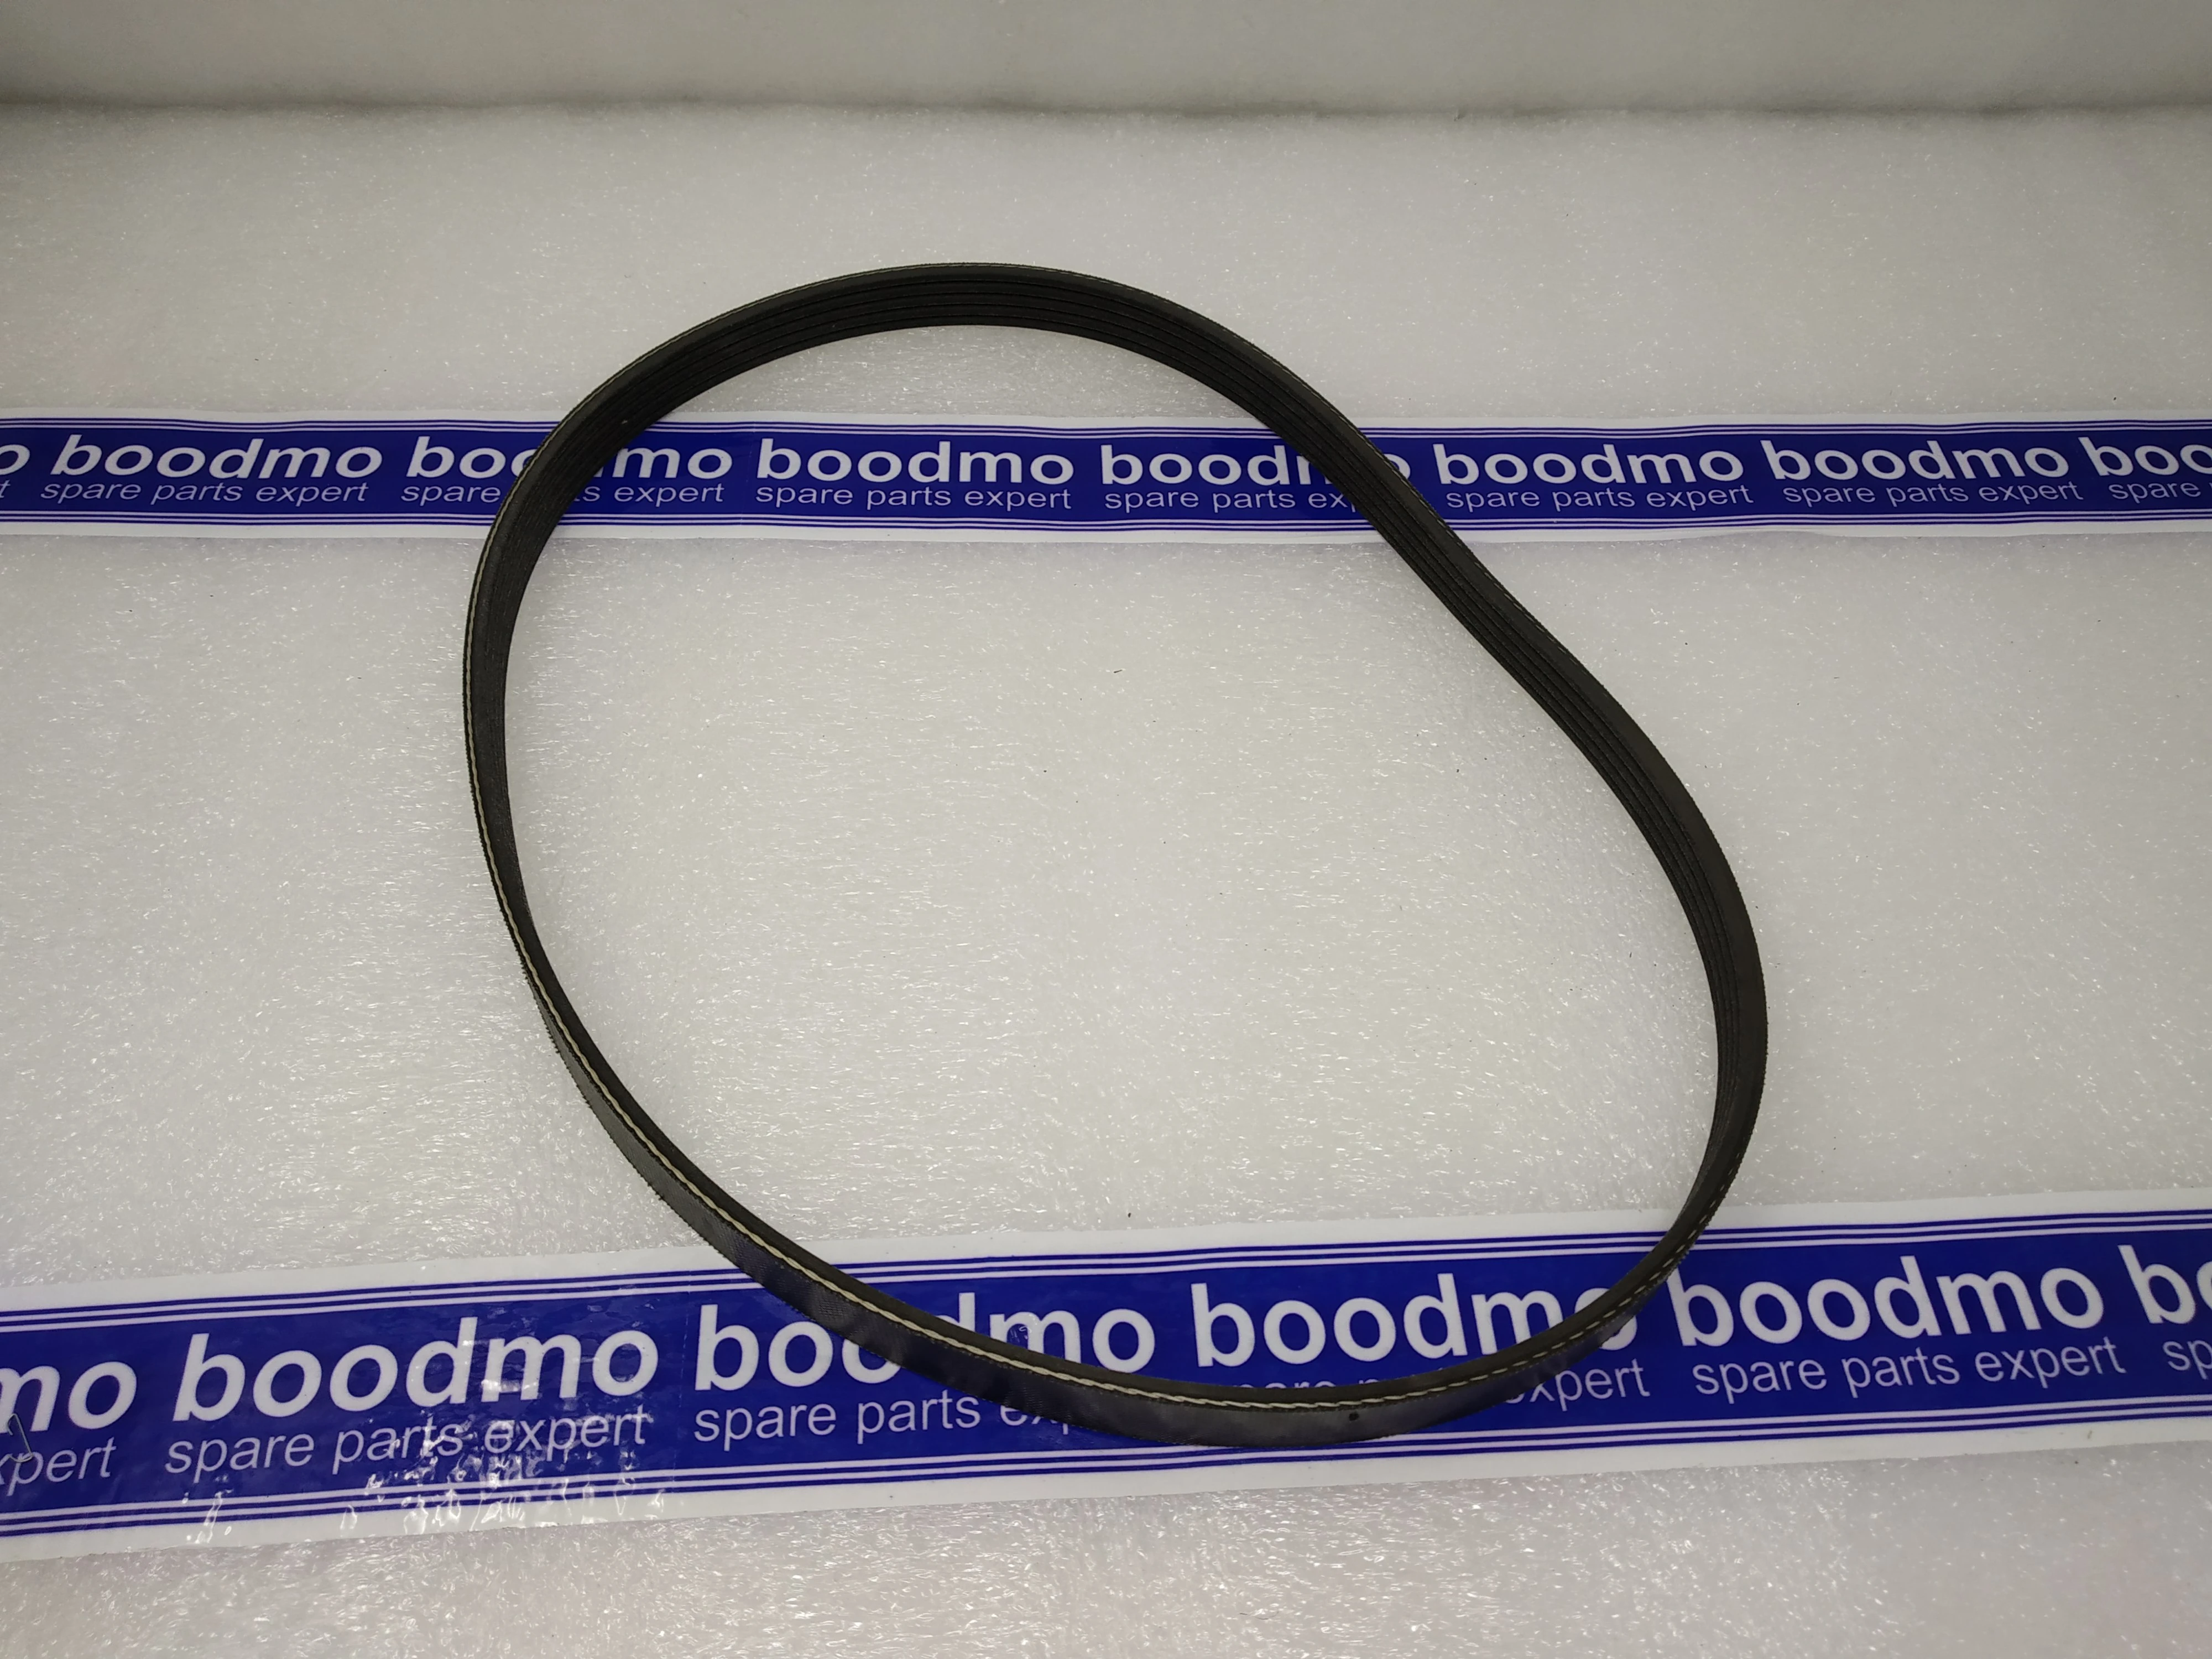 V-Ribbed Belt: BANDO 5P90 -compatibility, features, prices. boodmo